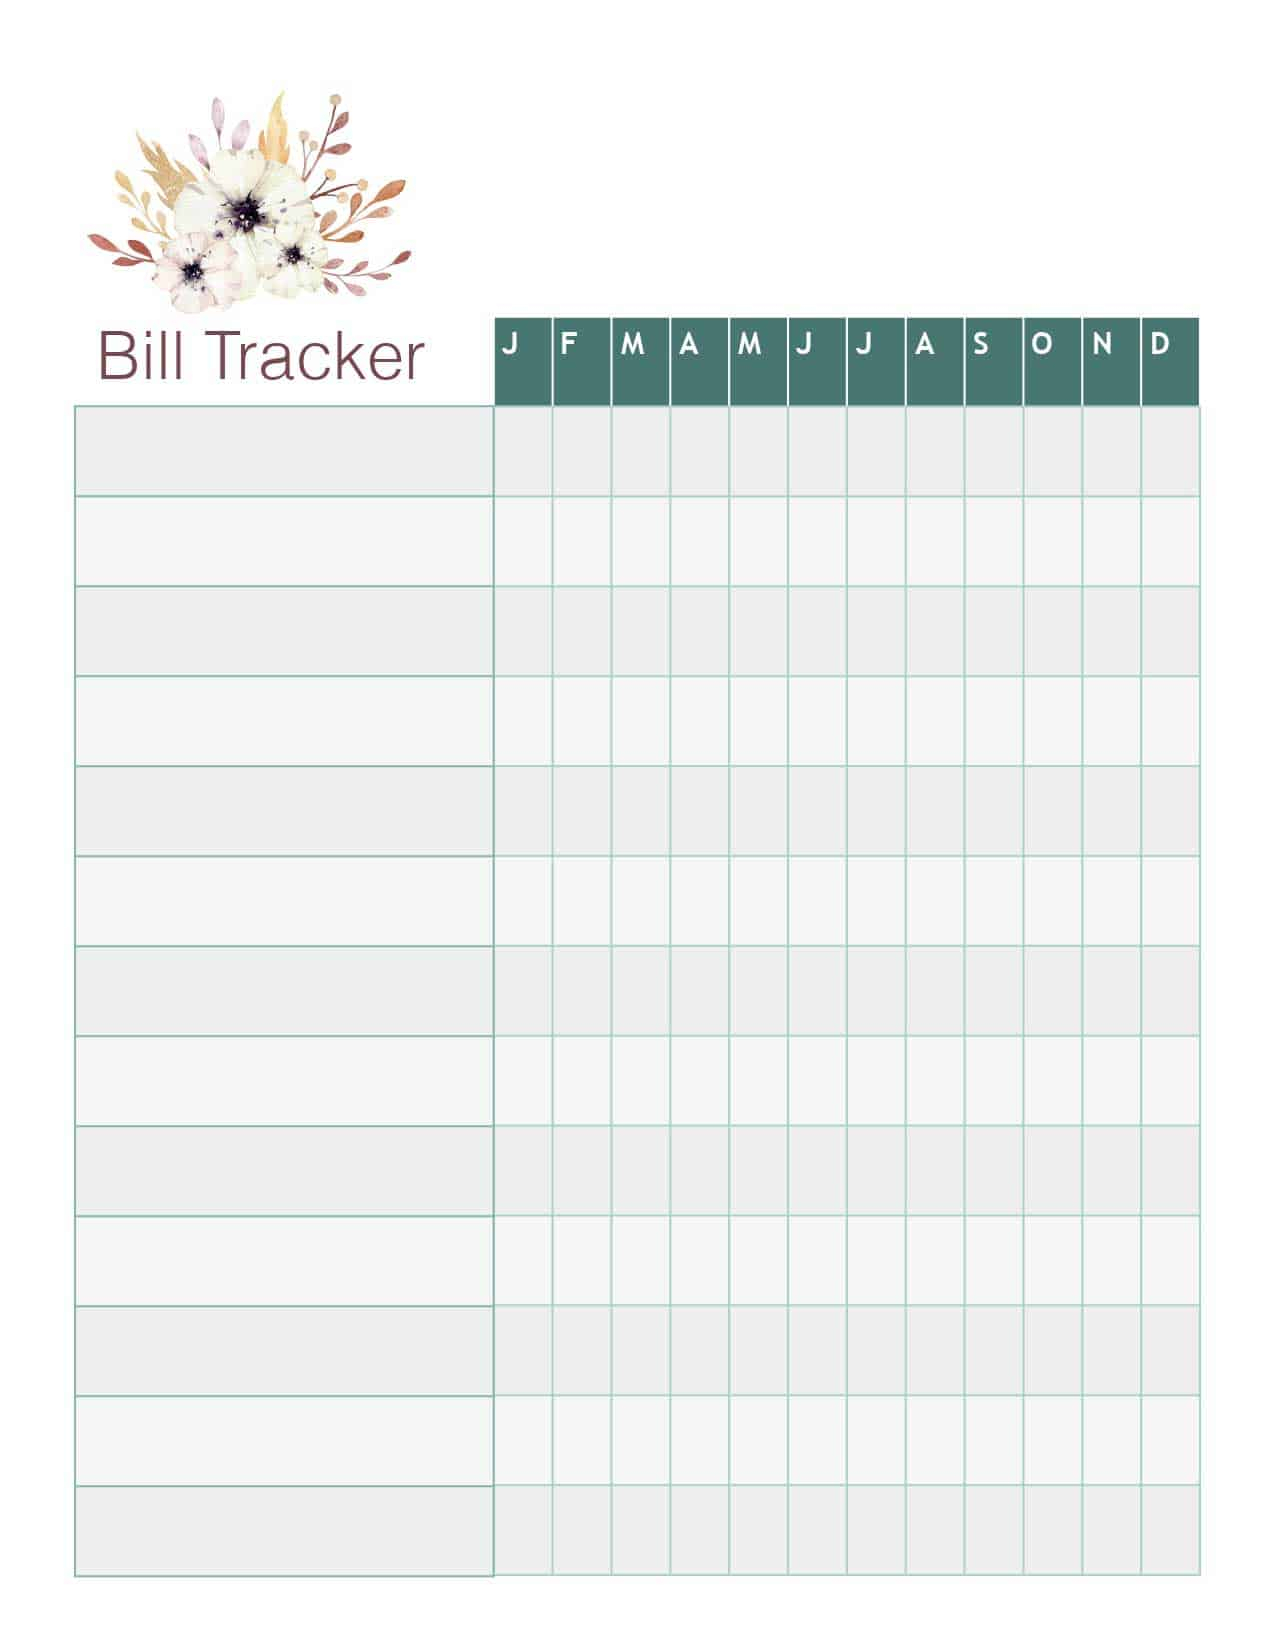 Download Your Free Budget Tracker Printables And Get Your regarding Free Bill Tracker Printable